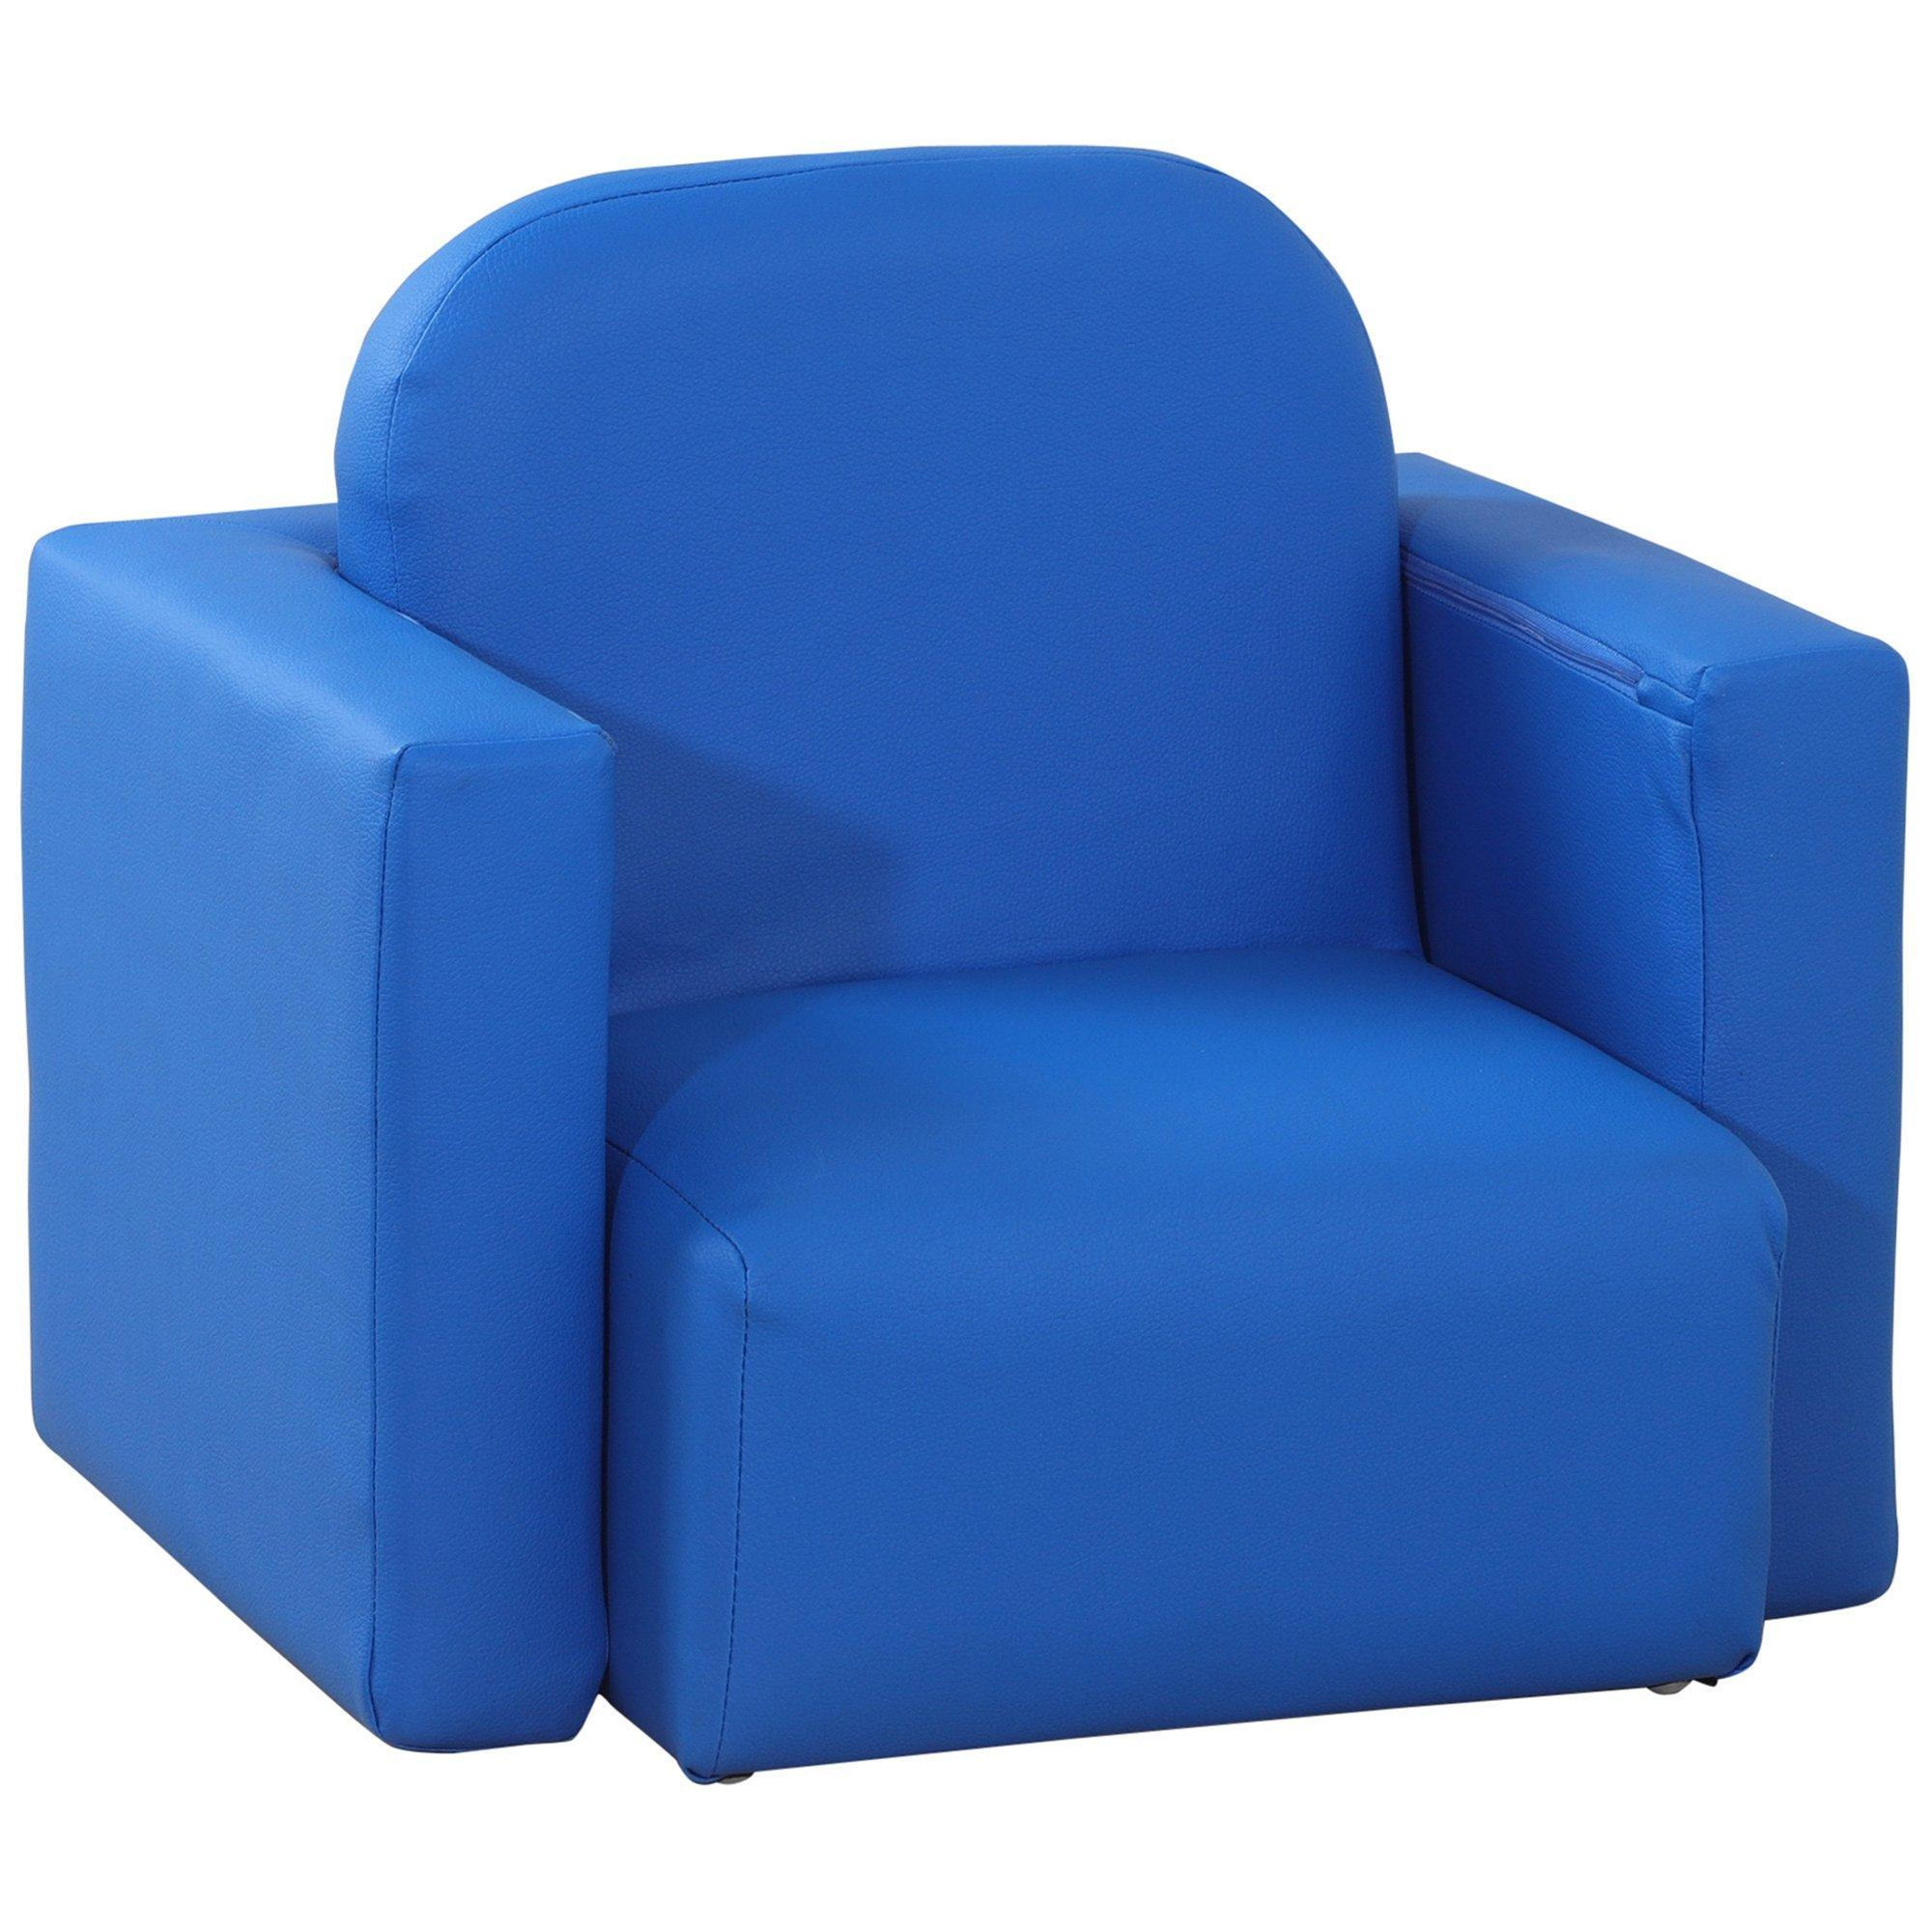 Kids Mini Sofa 2 In 1 Table Chair Set Children Armchair Seat Relax Girl Boys - image 1